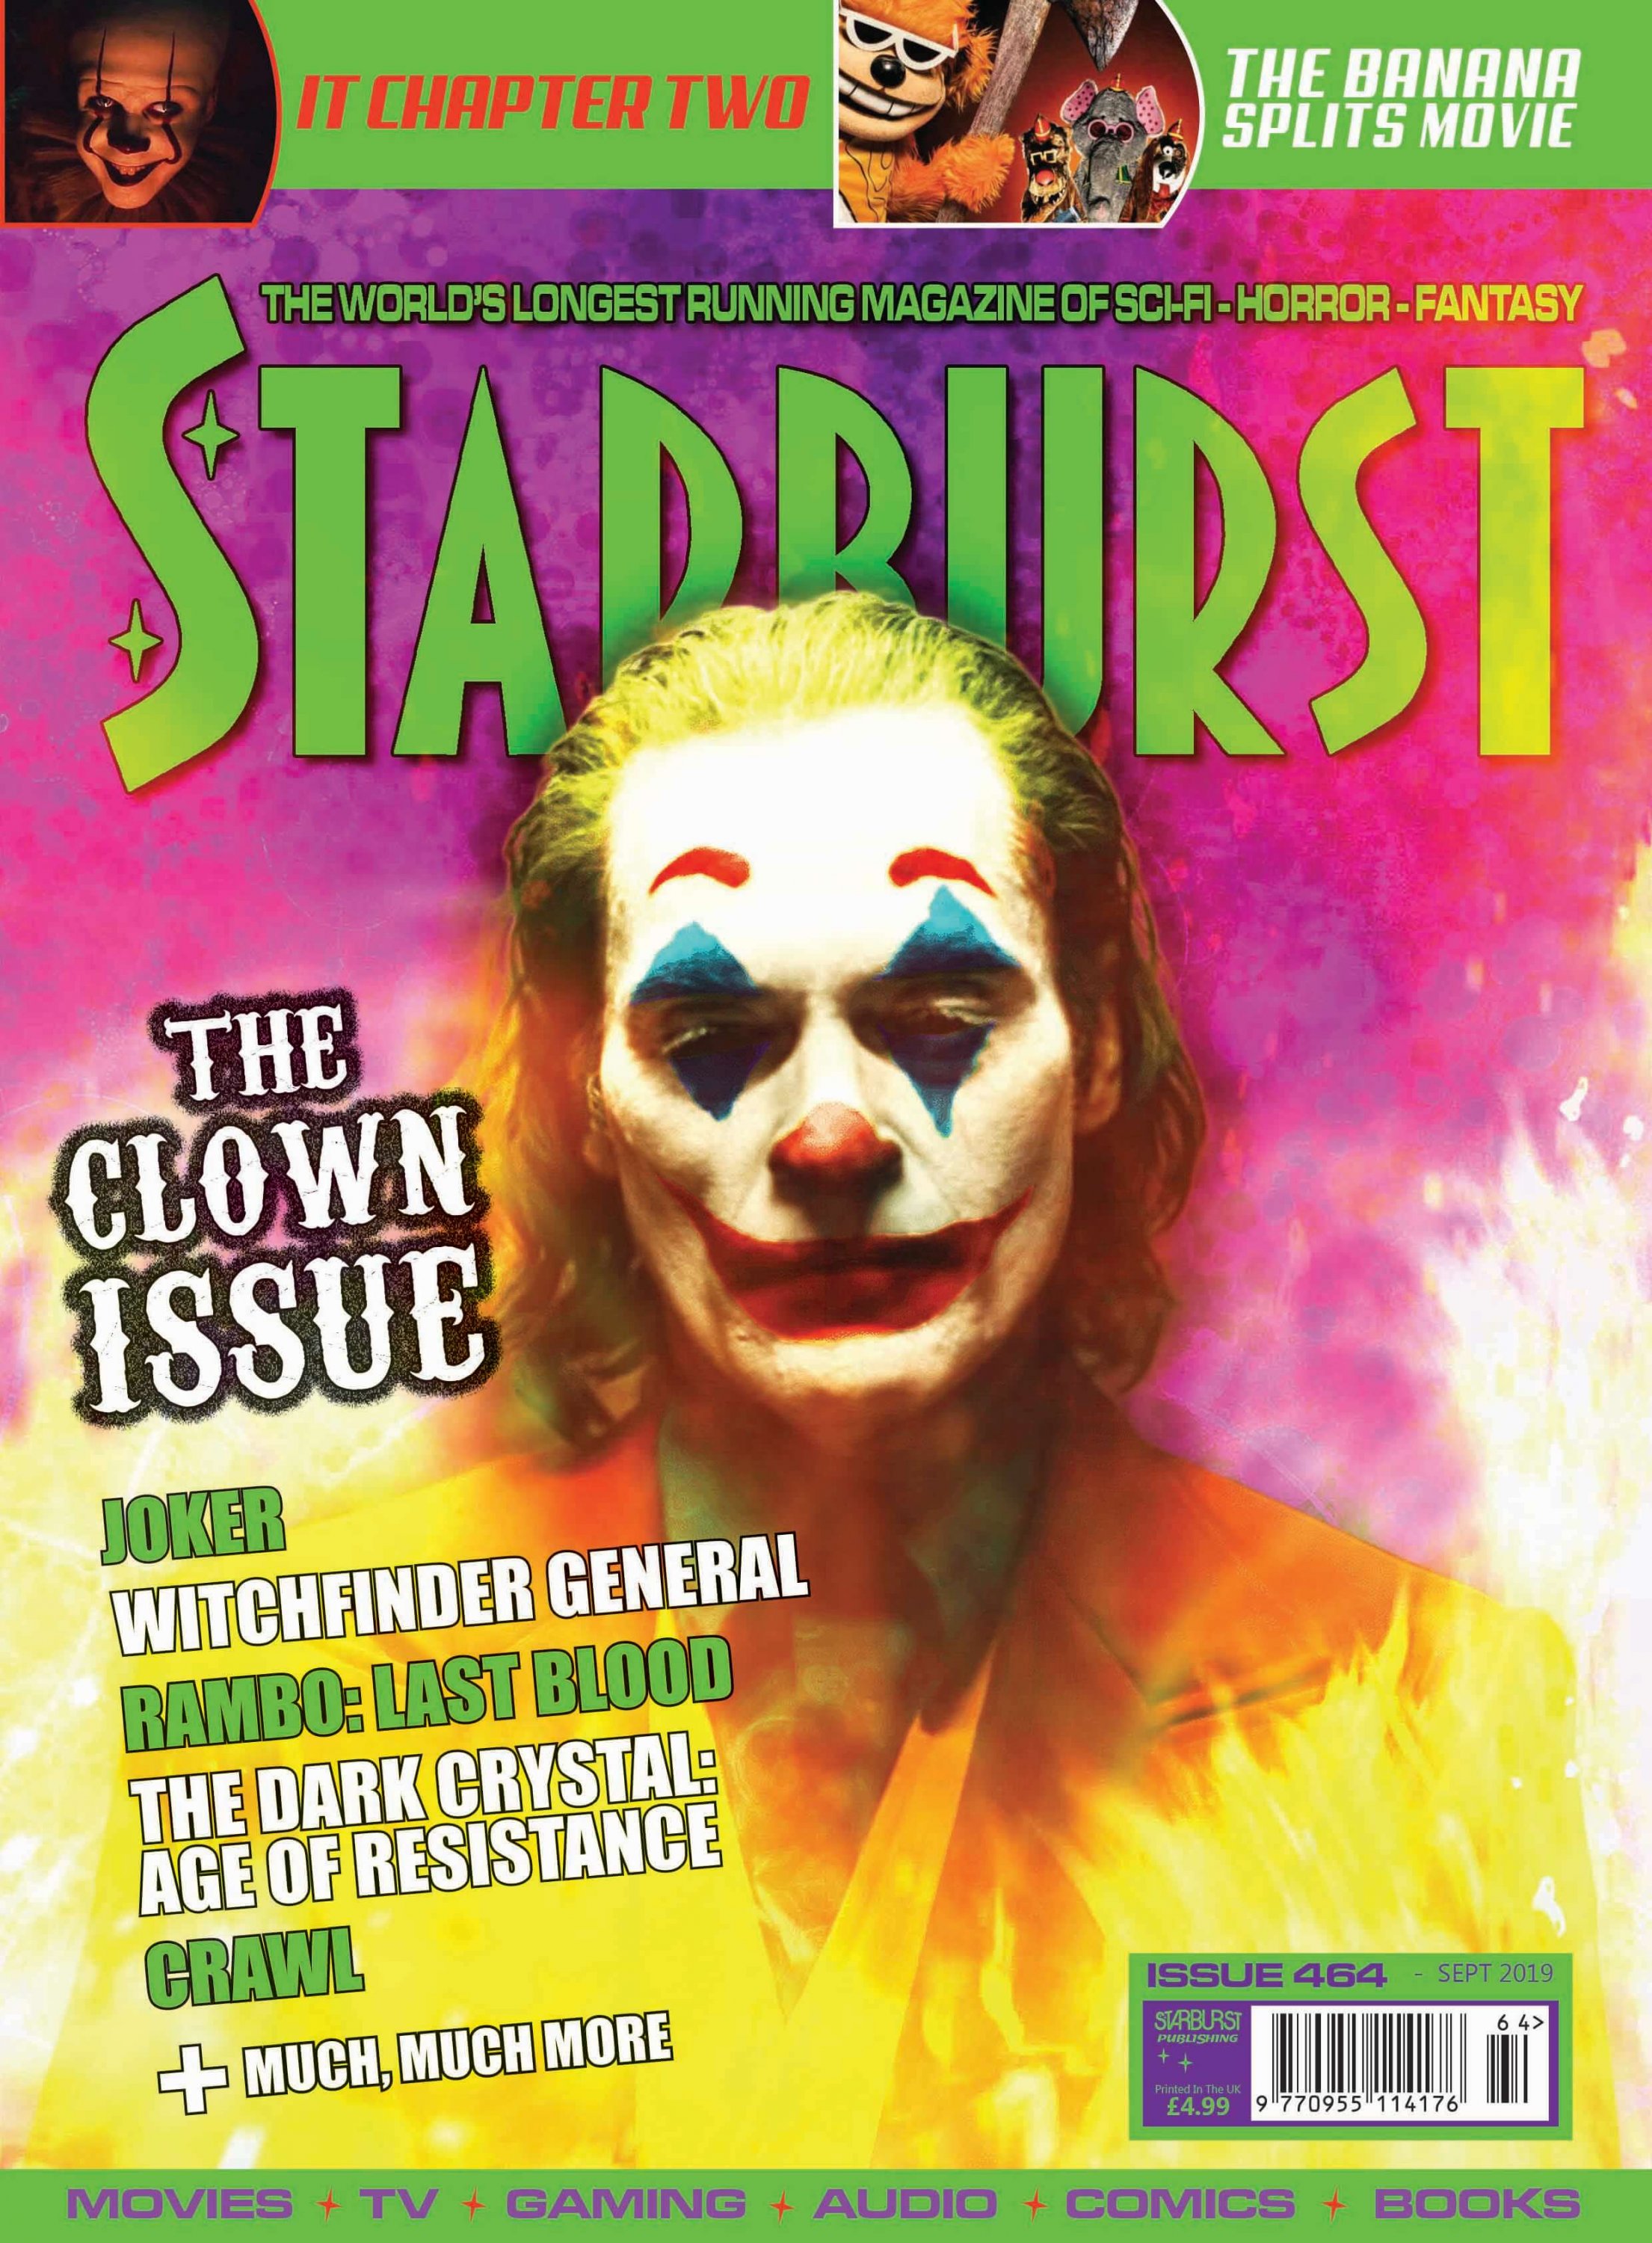 Out Now - Issue 464 - STARBURST Magazine